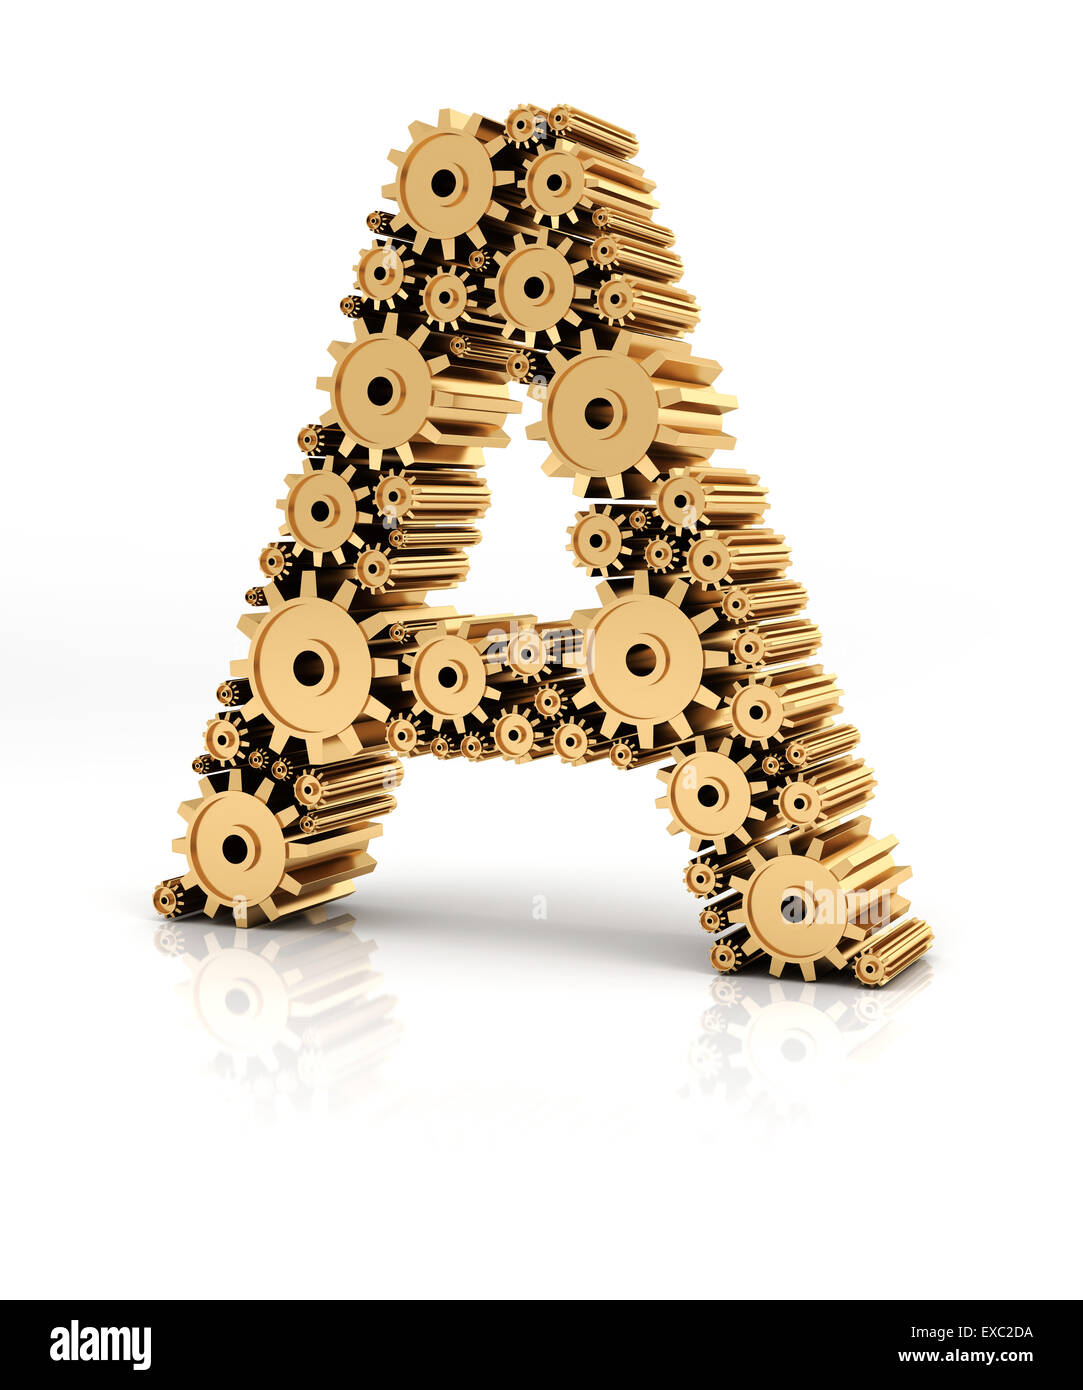 Alphabet A formed by gears Stock Photo